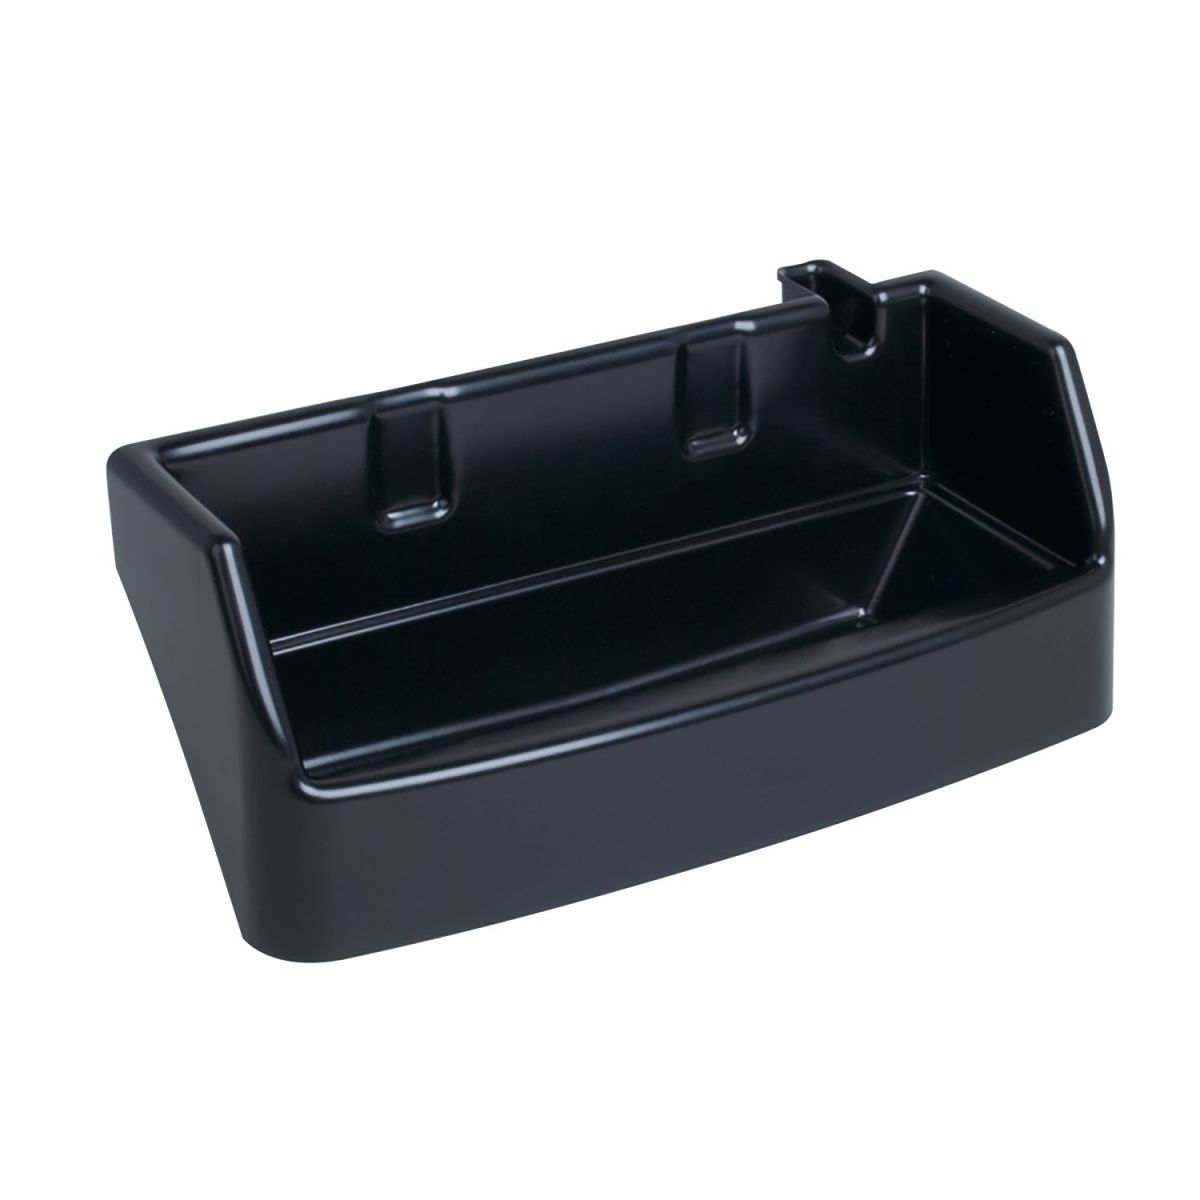 JDF-4 S Extended Drip Tray Kit